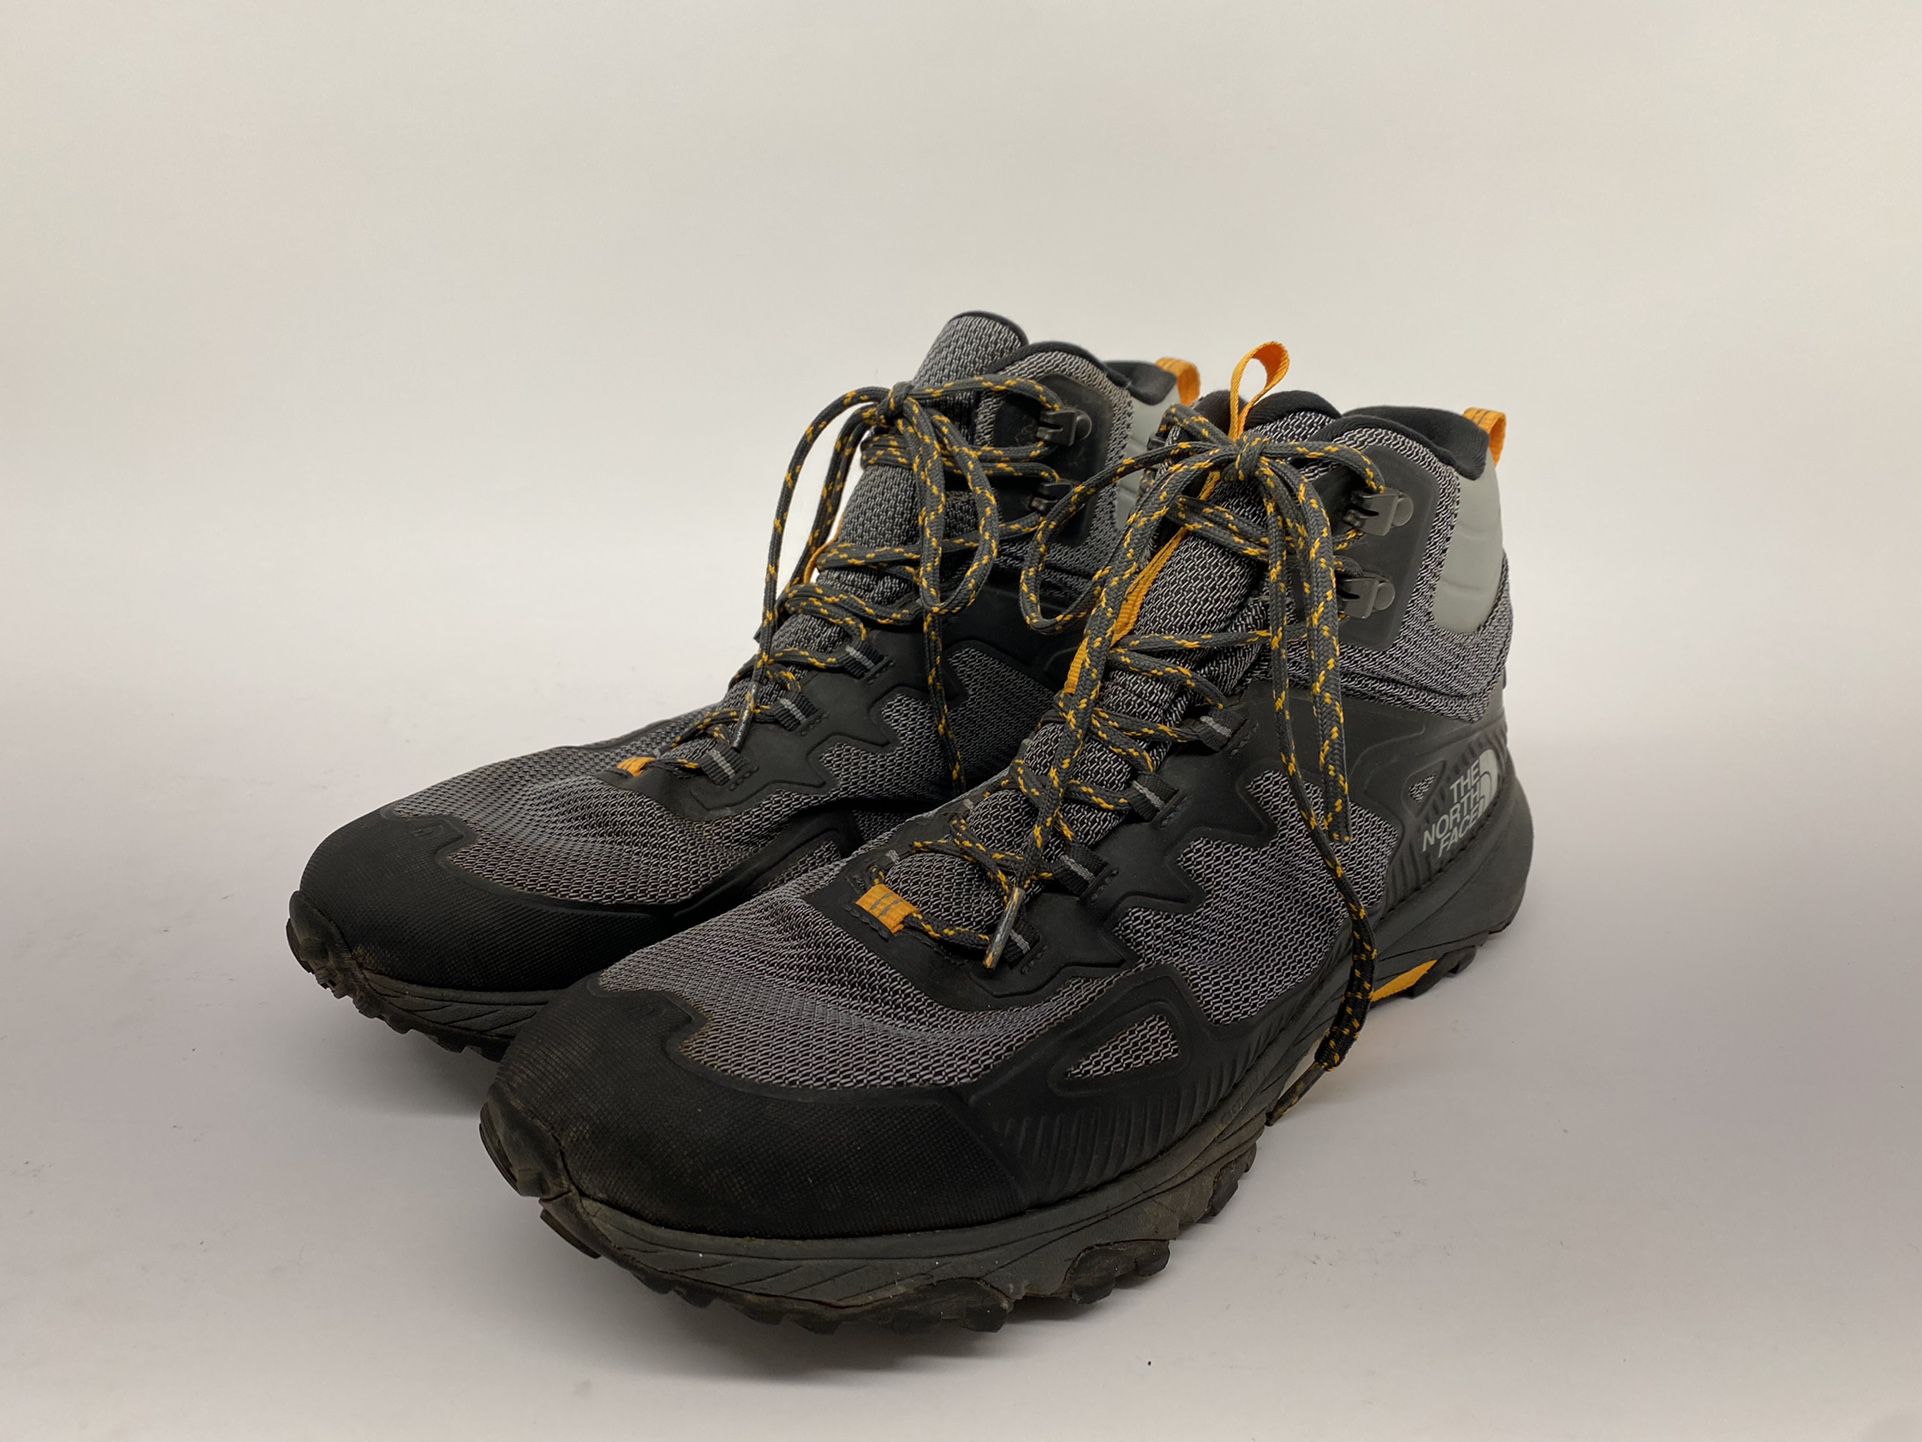 The North Face Ultra Fastpack IV Mid Futurelight Boots 12.5 men’s